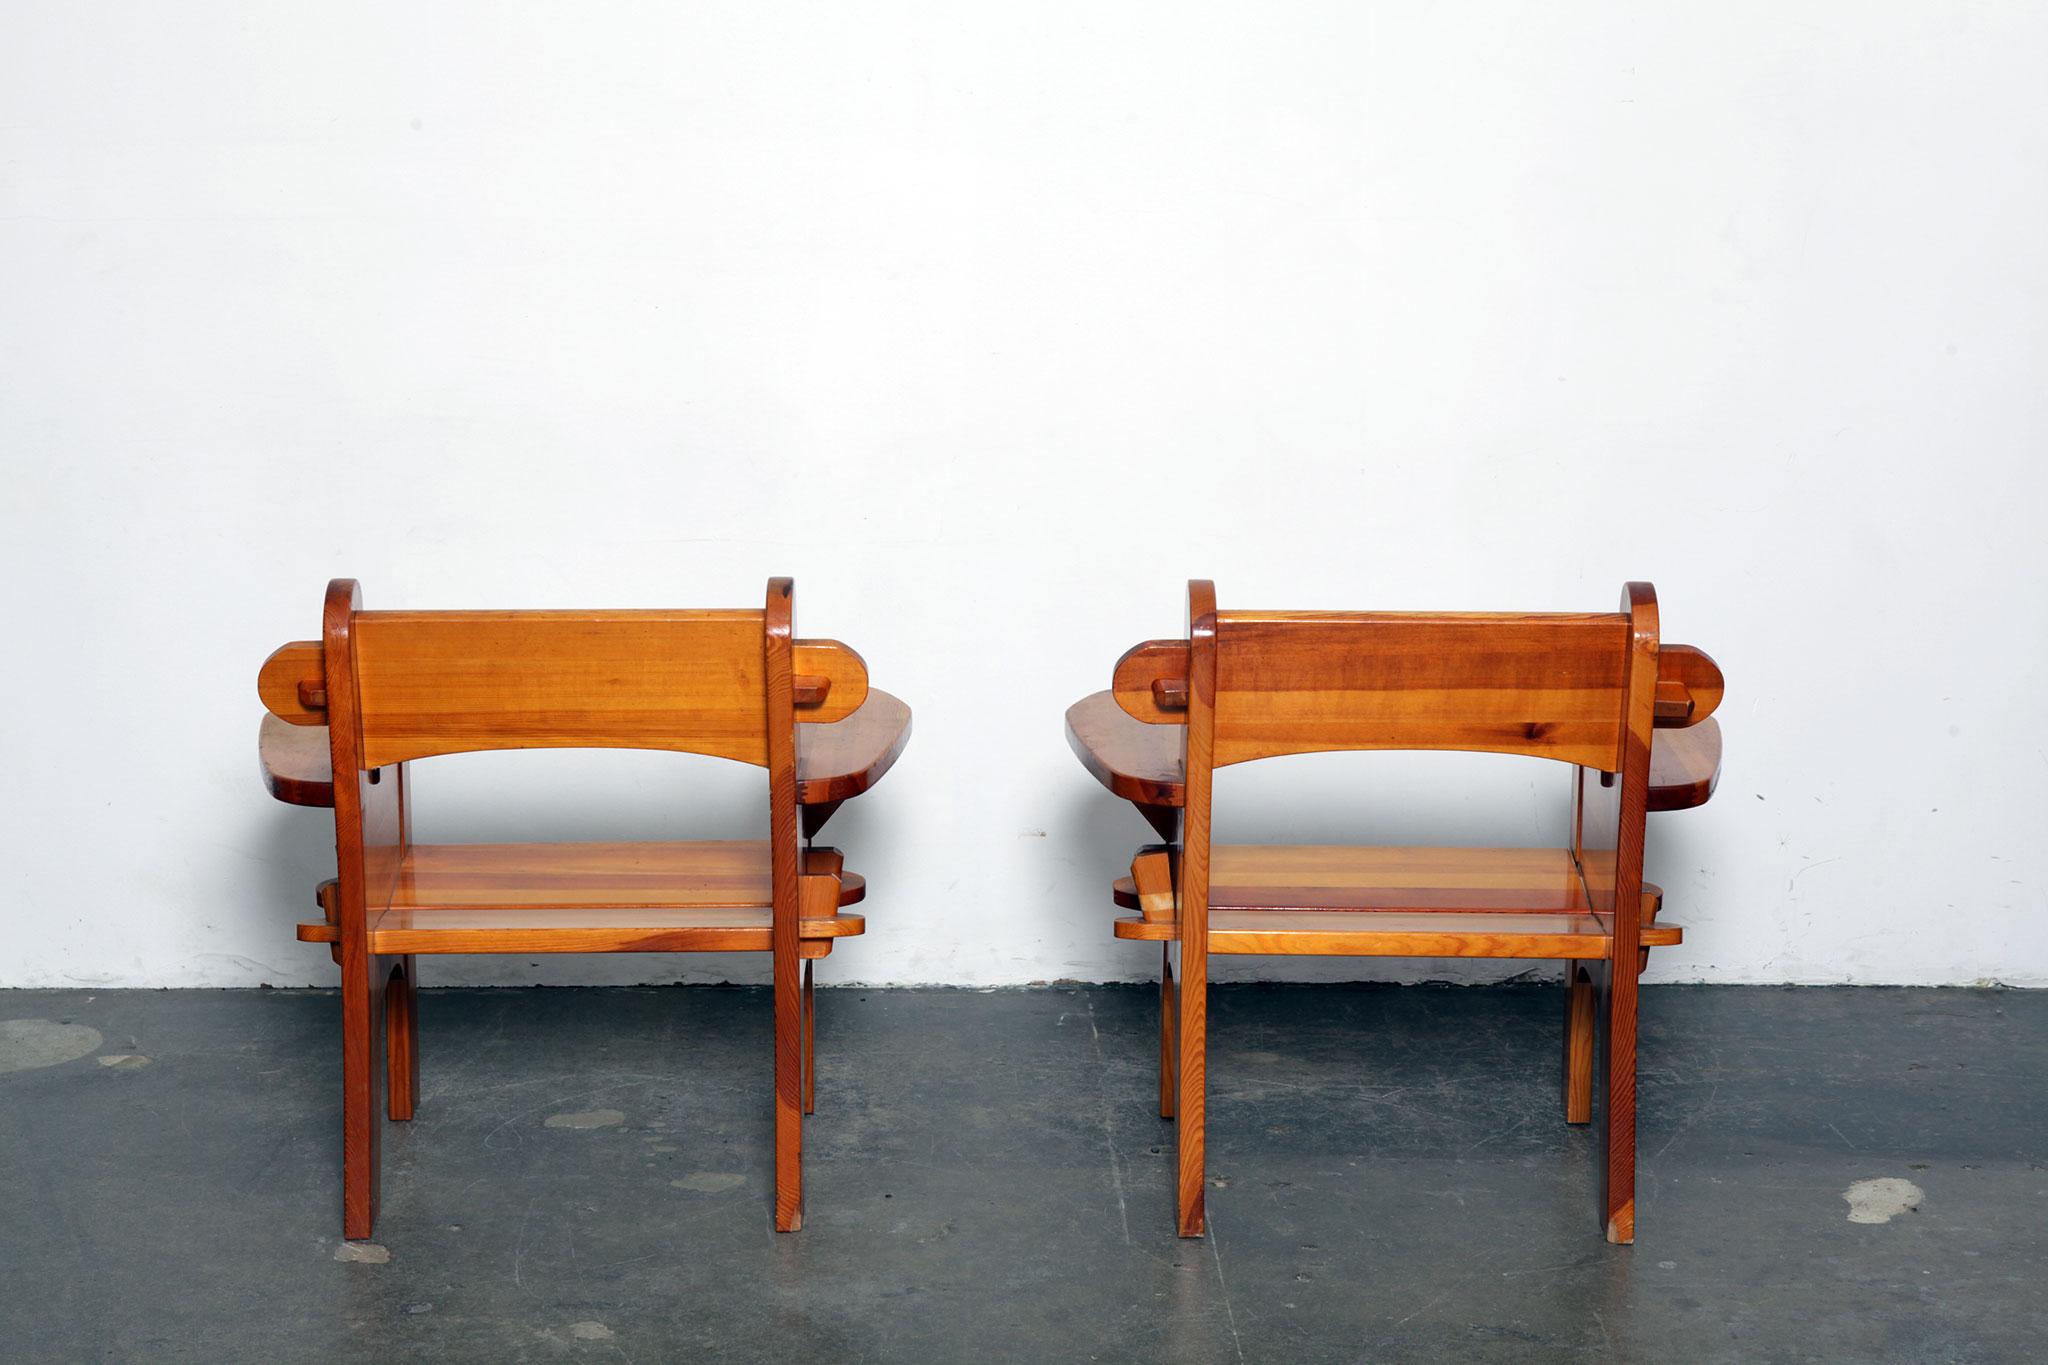 Lacquered Pair of Solid Pine 'Berga' Chairs by David Rosen for Nordiska Kompaniet, Sweden For Sale